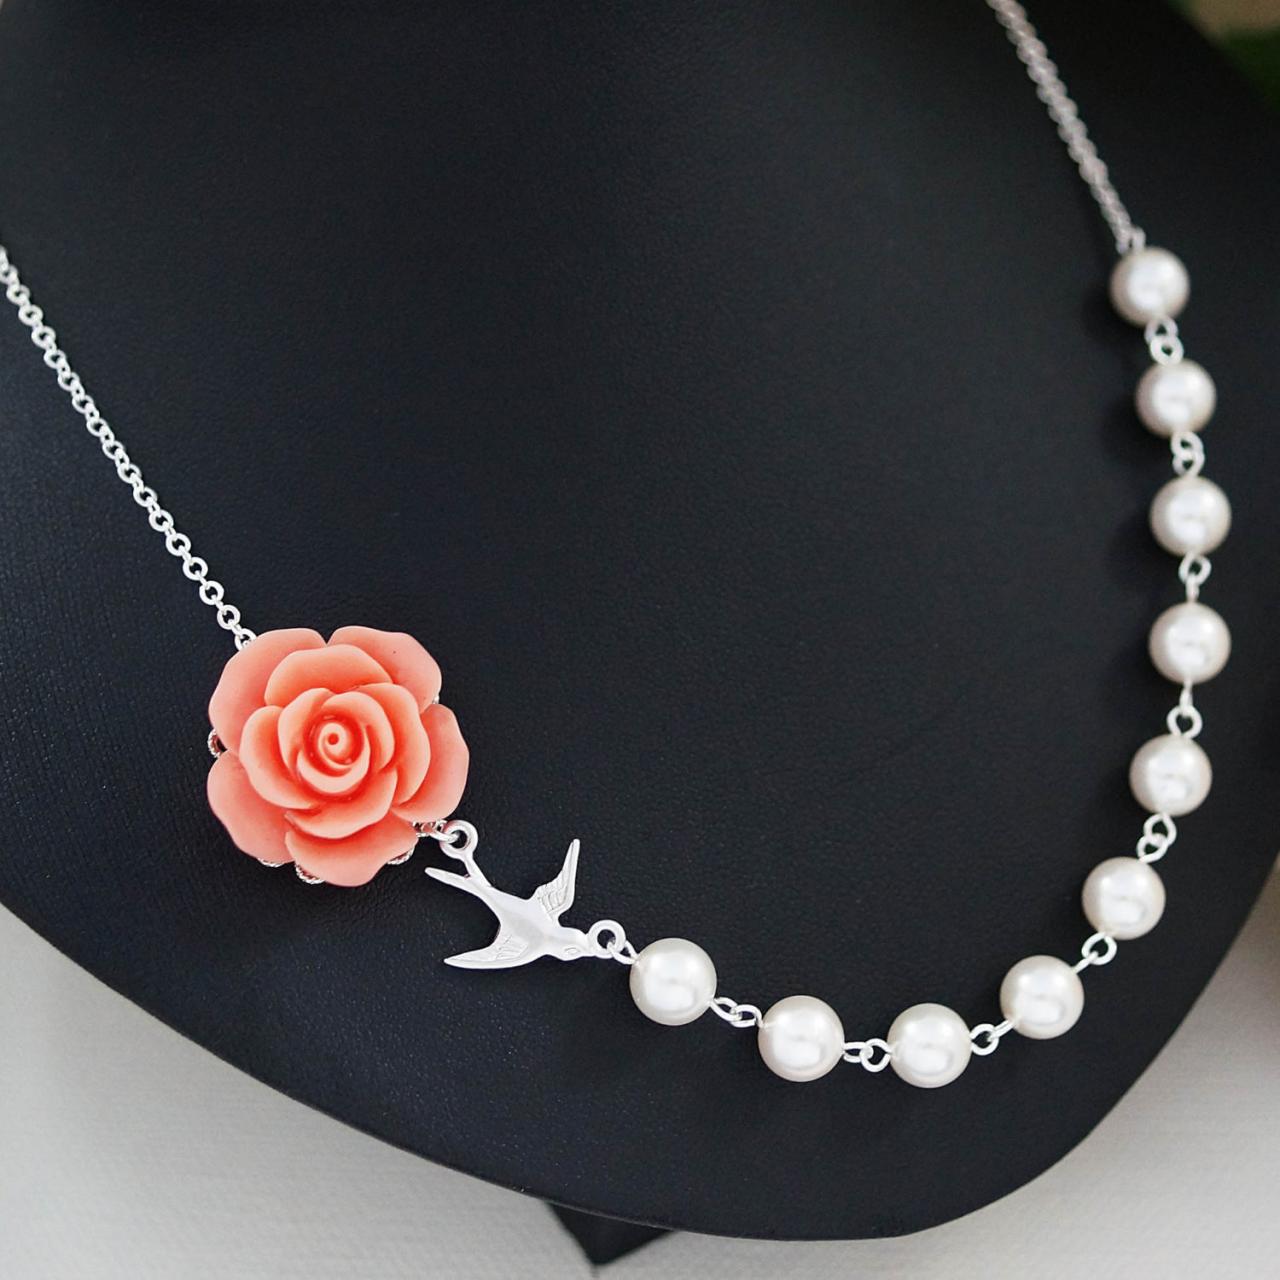 Bridesmaid Gifts Wedding Bridesmaid Jewelry Coral Rose Flower Cabochon And Crystal White Swarovski Pearls Bridal Necklace